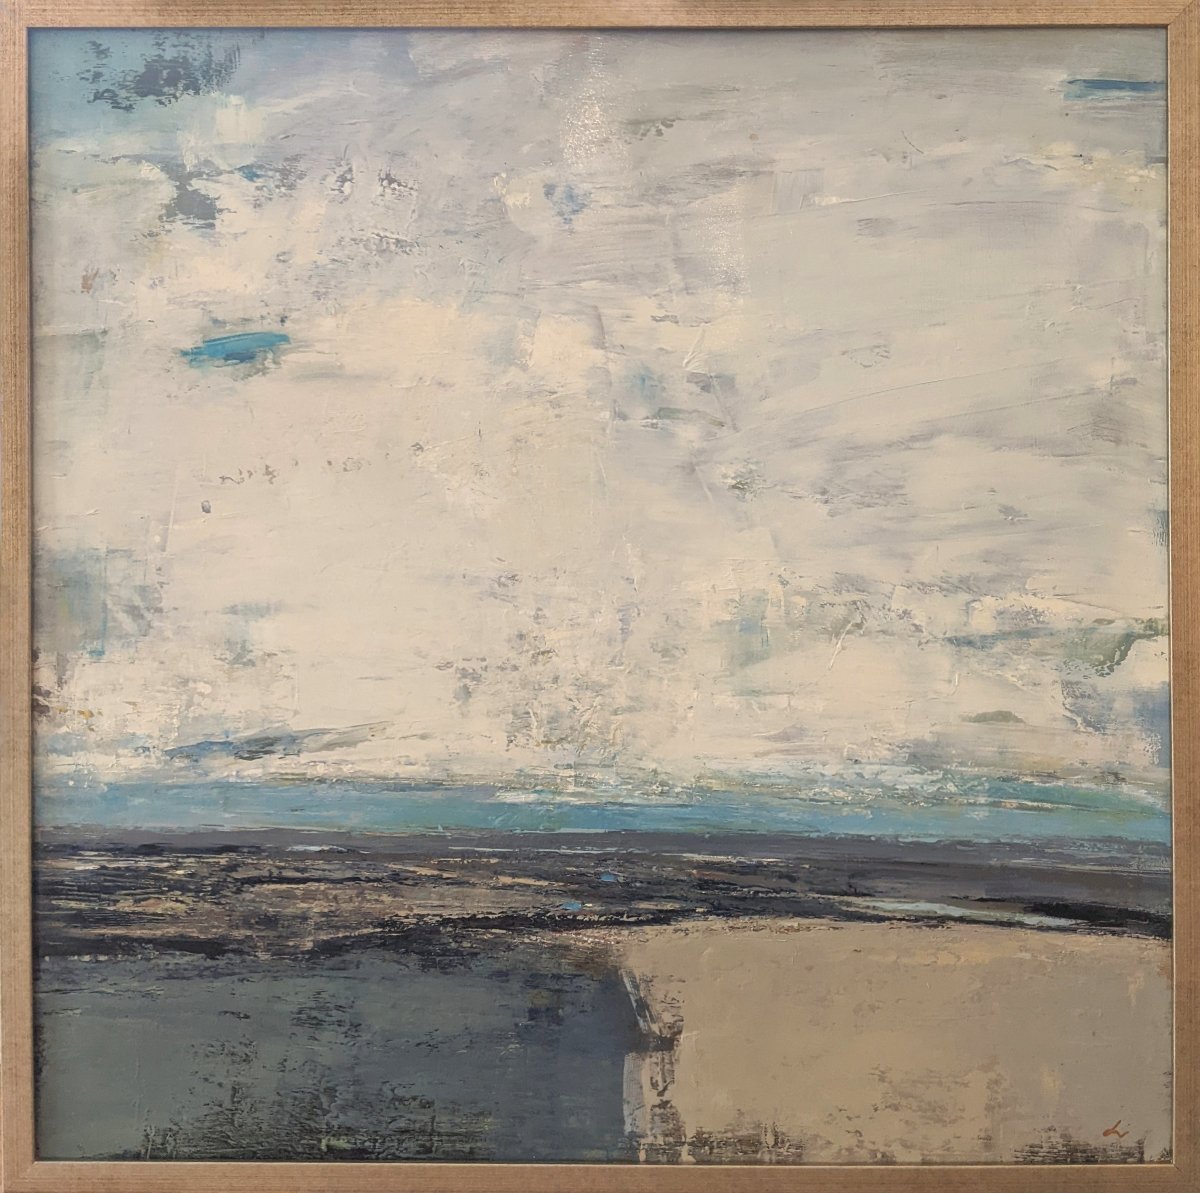 Drifting by Deborah Hill at LePrince Galleries